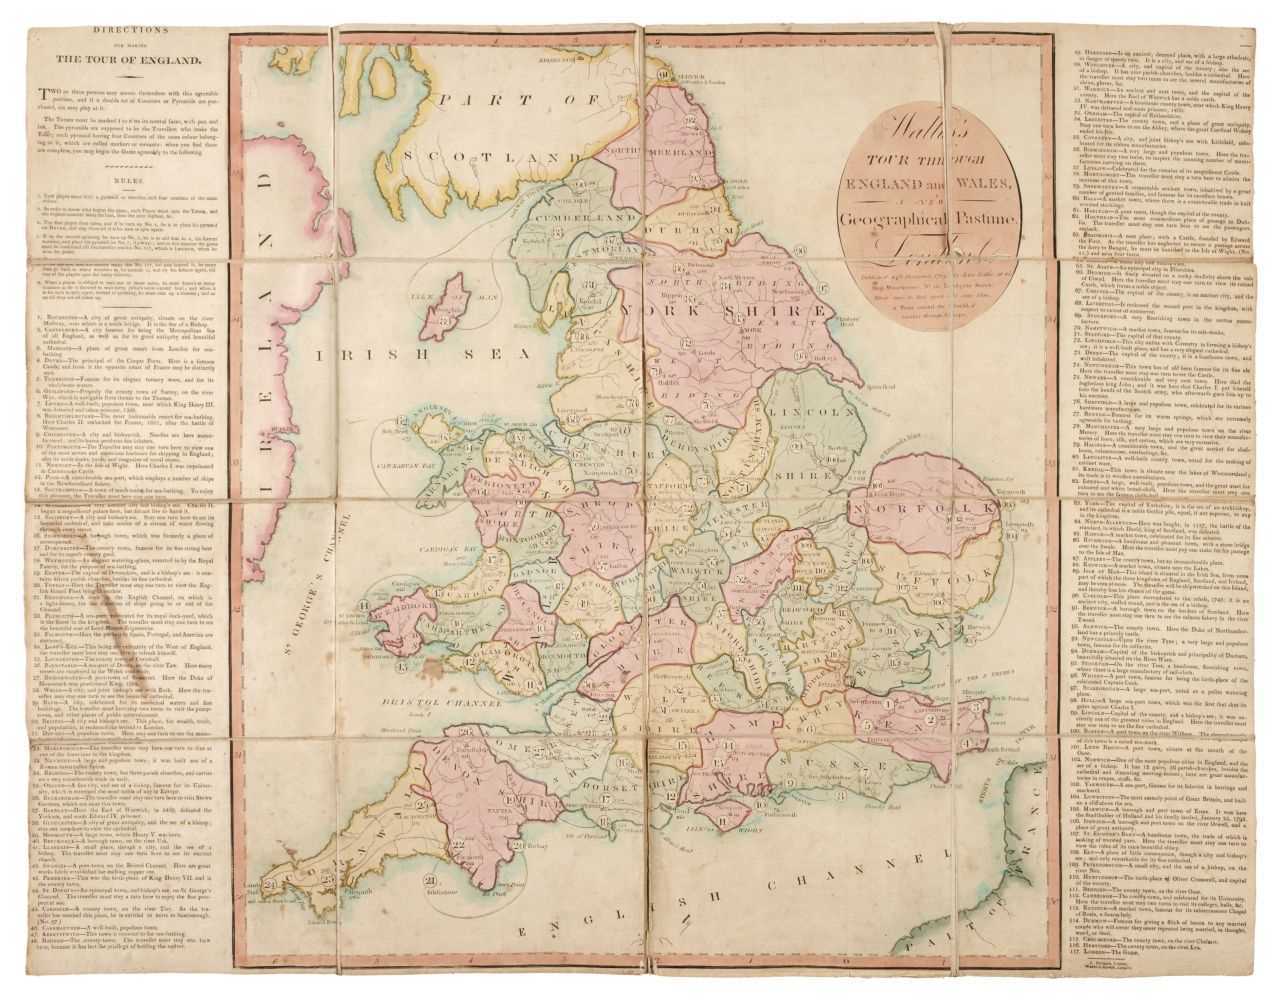 Lot 16 - England & Wales. Wallis's Tour Through England and Wales, A New Geographical Pastime, 1794